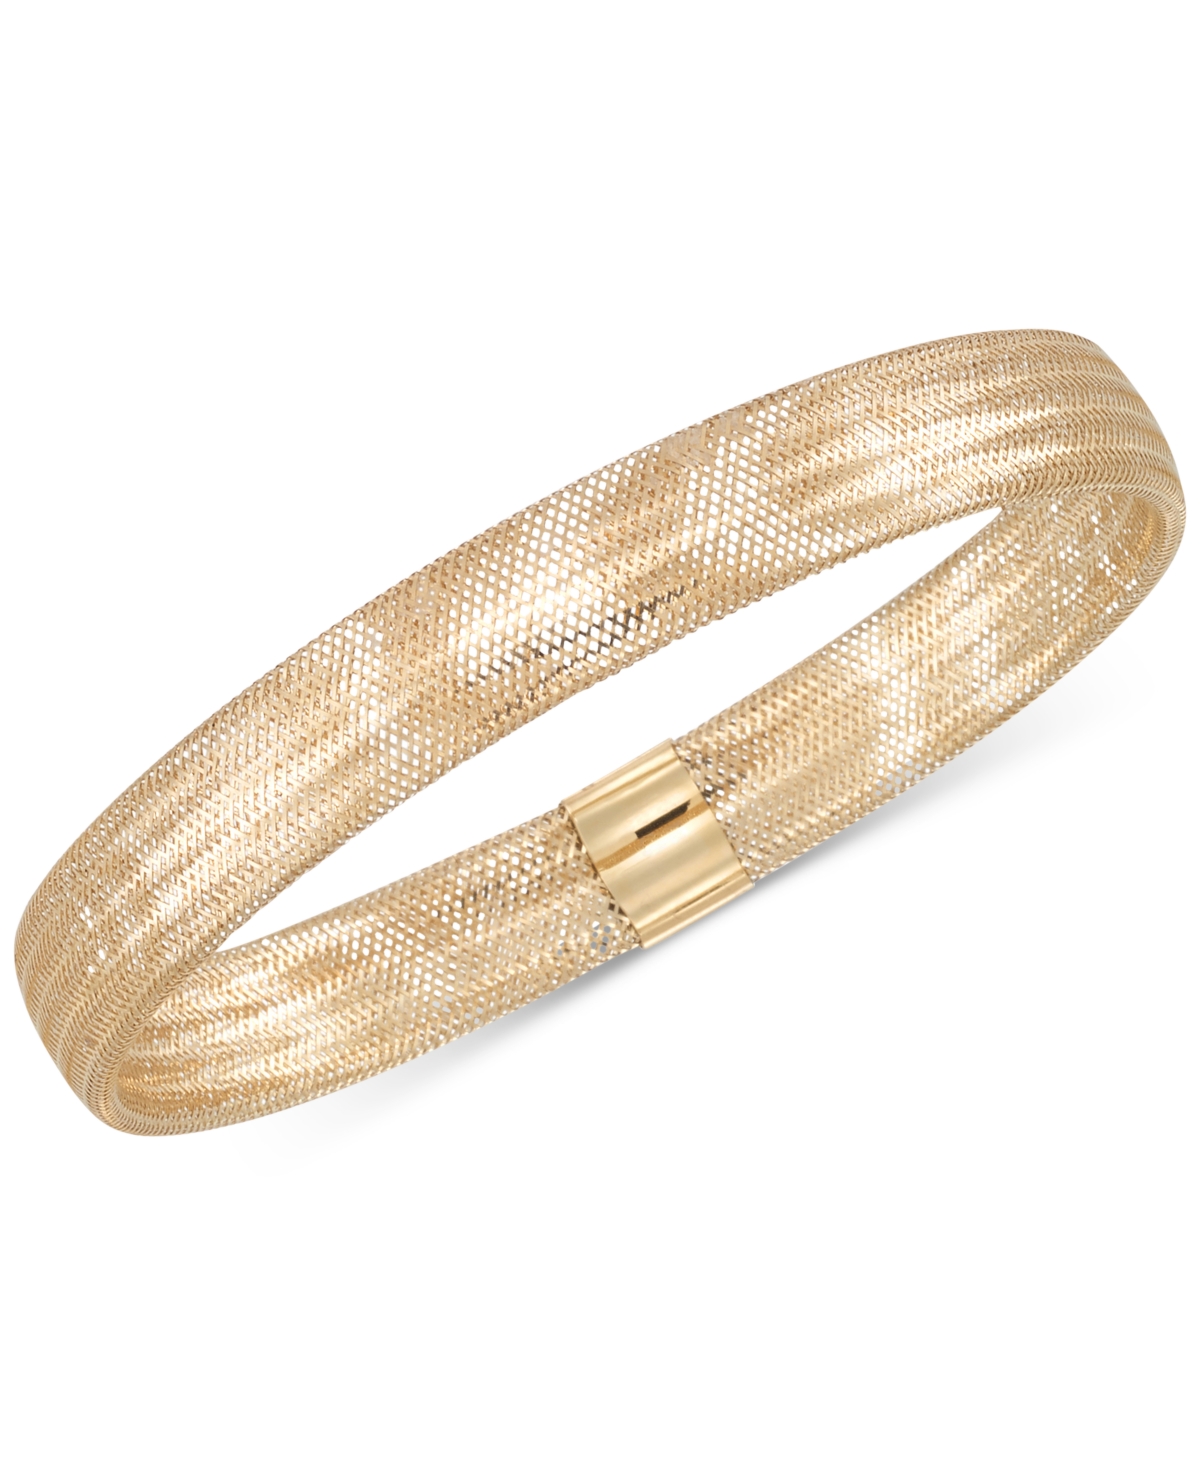 Stretch Bangle Bracelet in 14k Yellow, White or Rose Gold, Made in Italy - Rose Gold